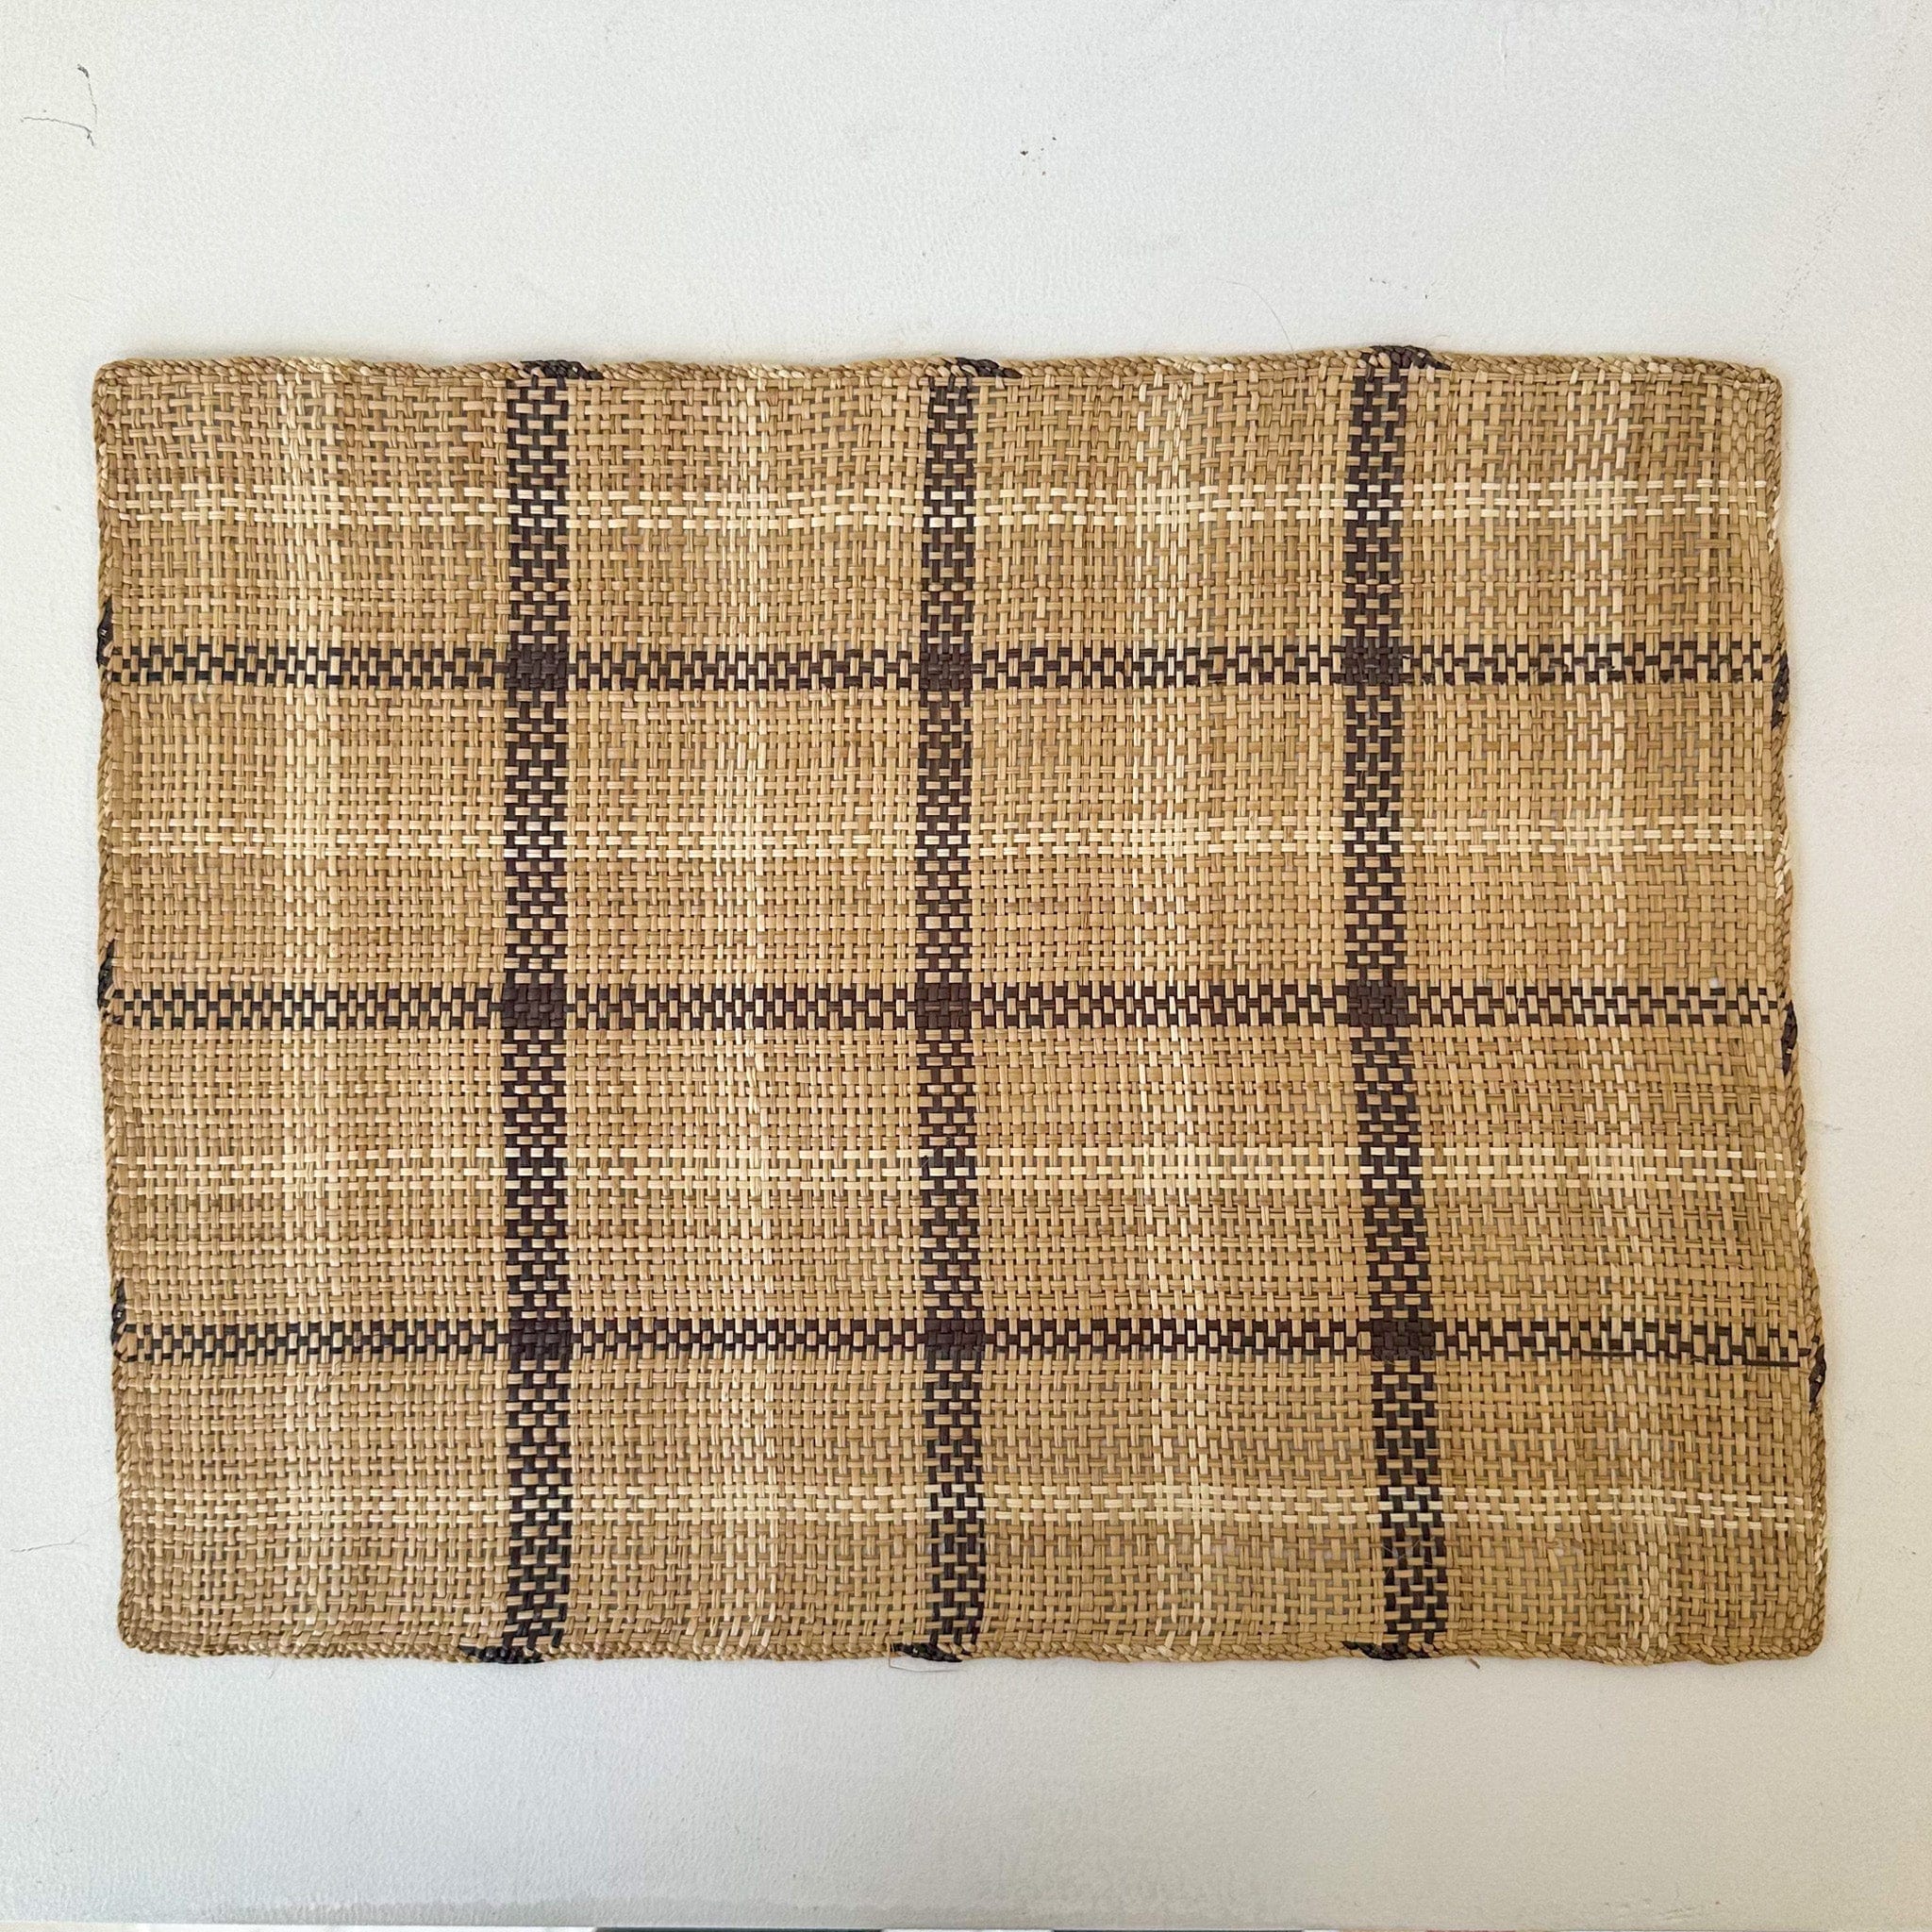 Guanabana Placemats Natural/Brown Striped Straw Placemat by Guanabana